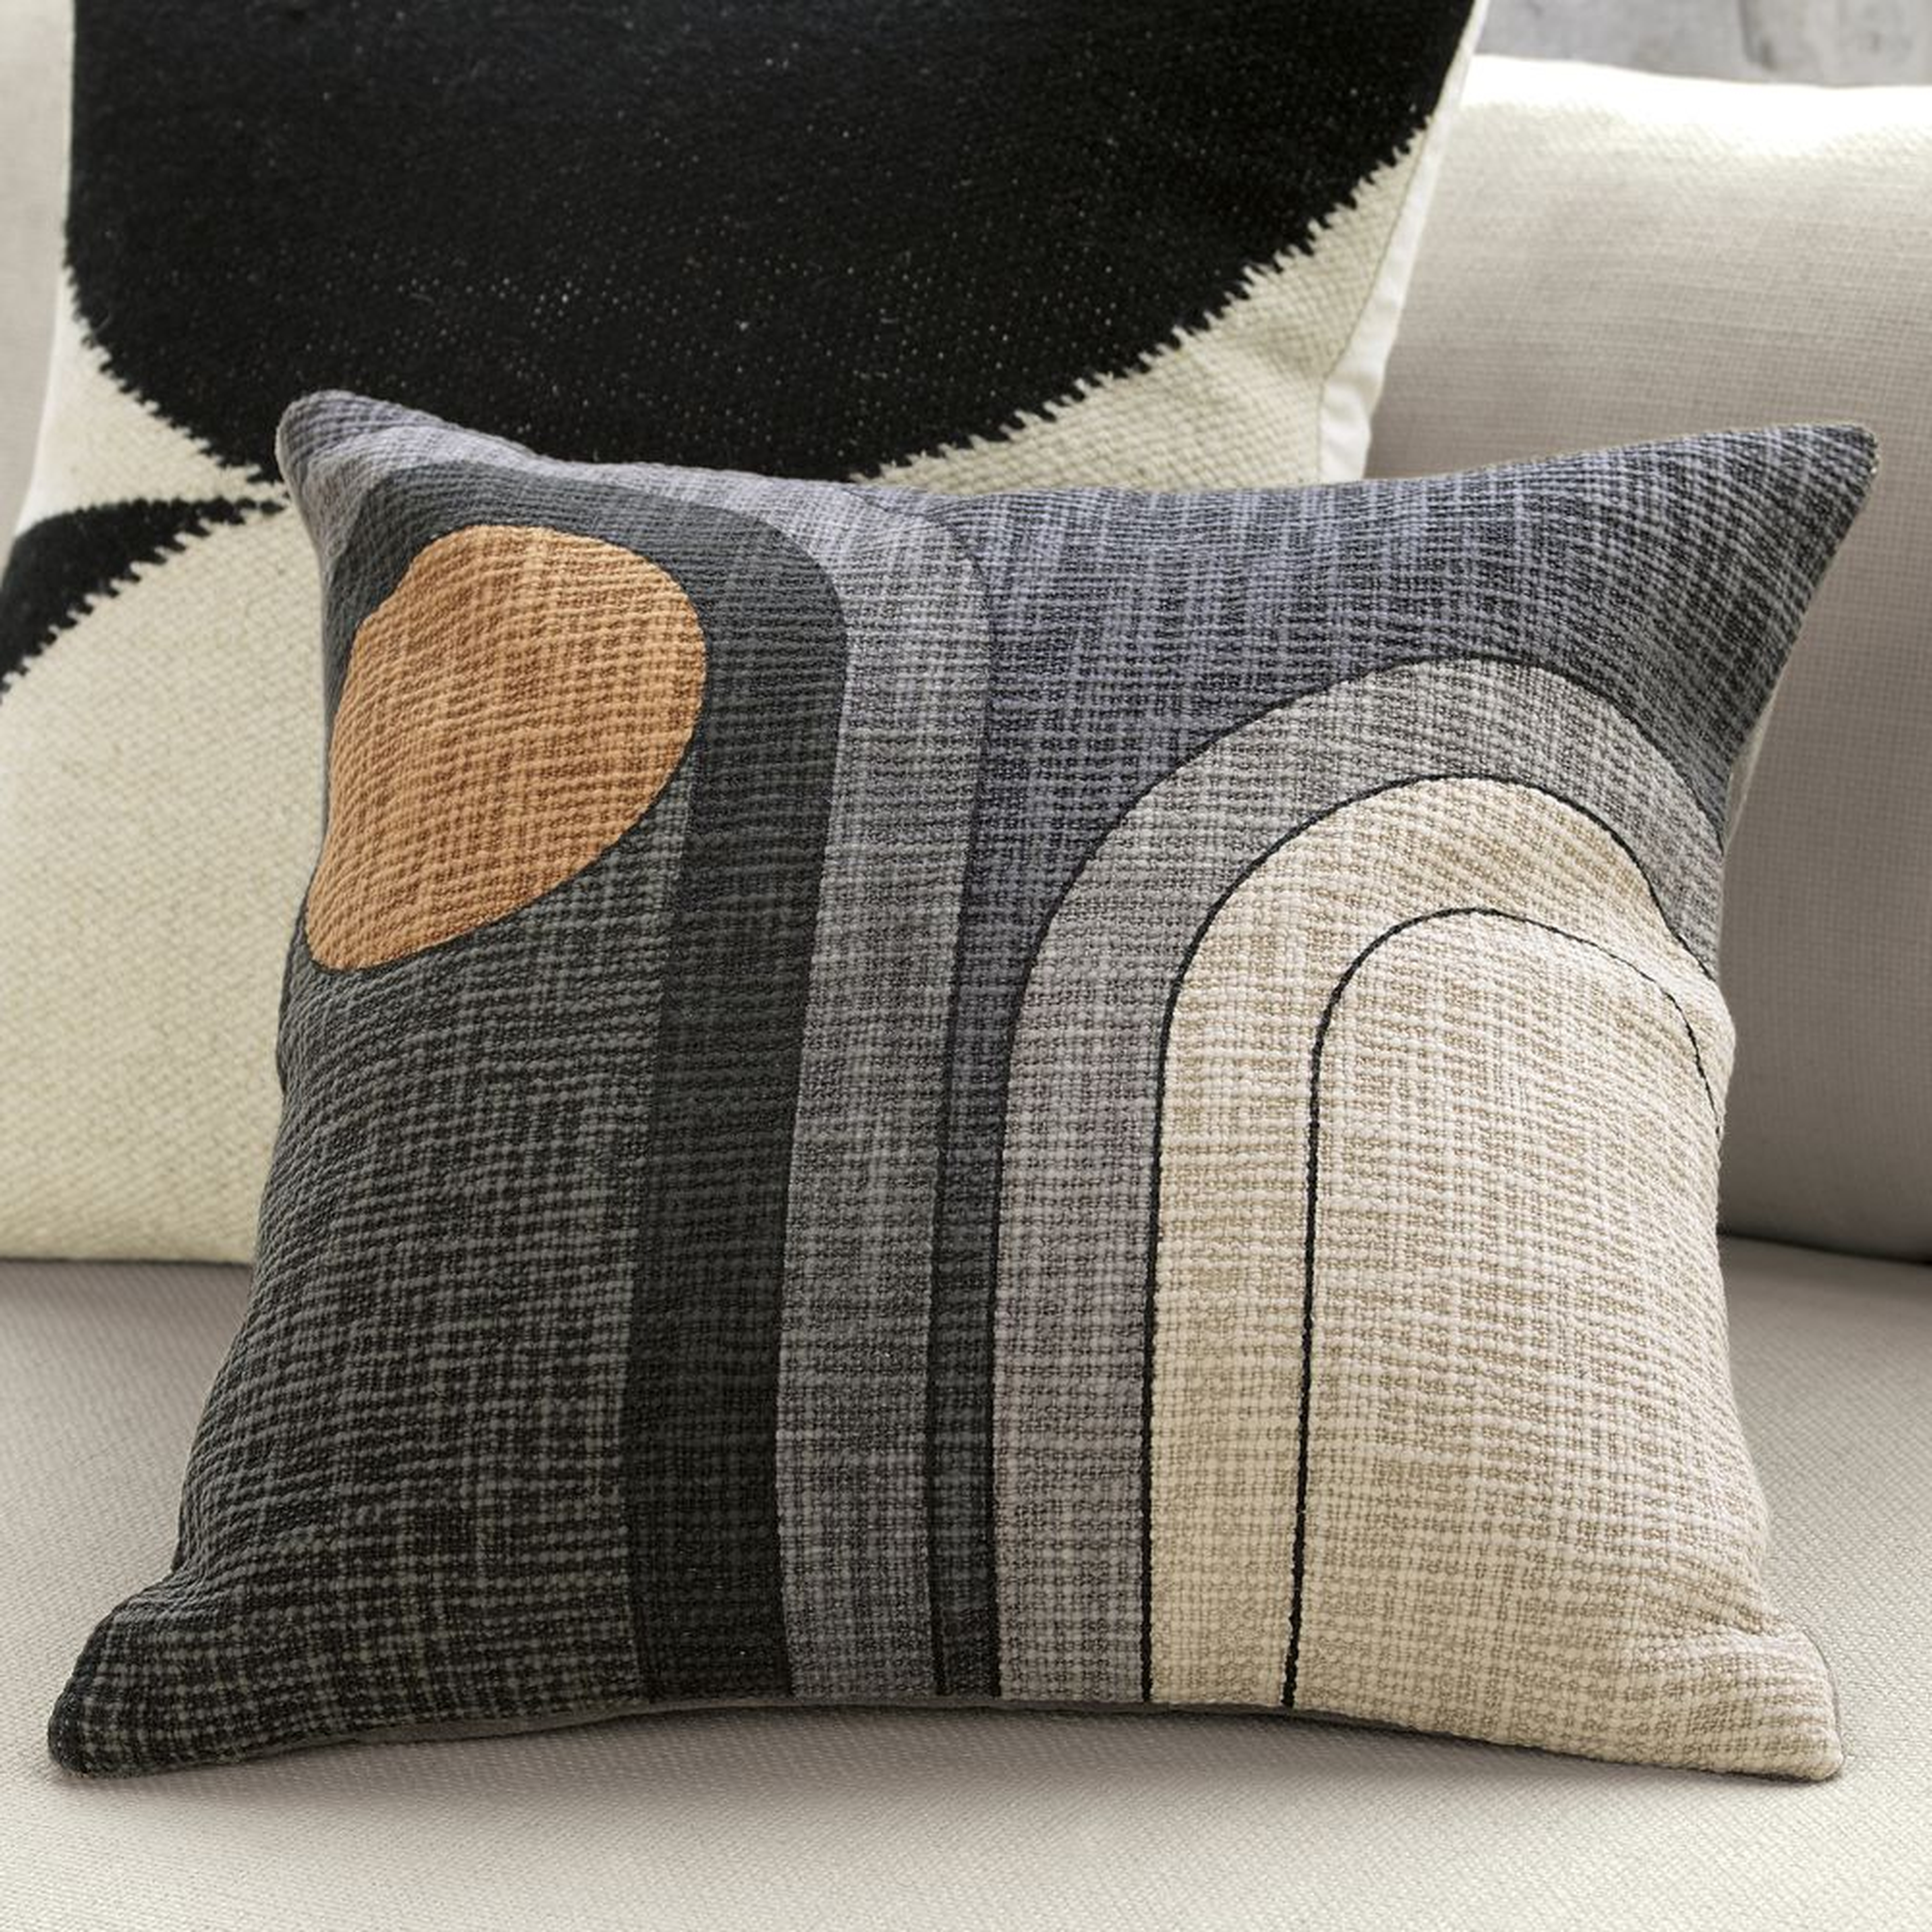 18" dream pillow with feather-down insert - CB2